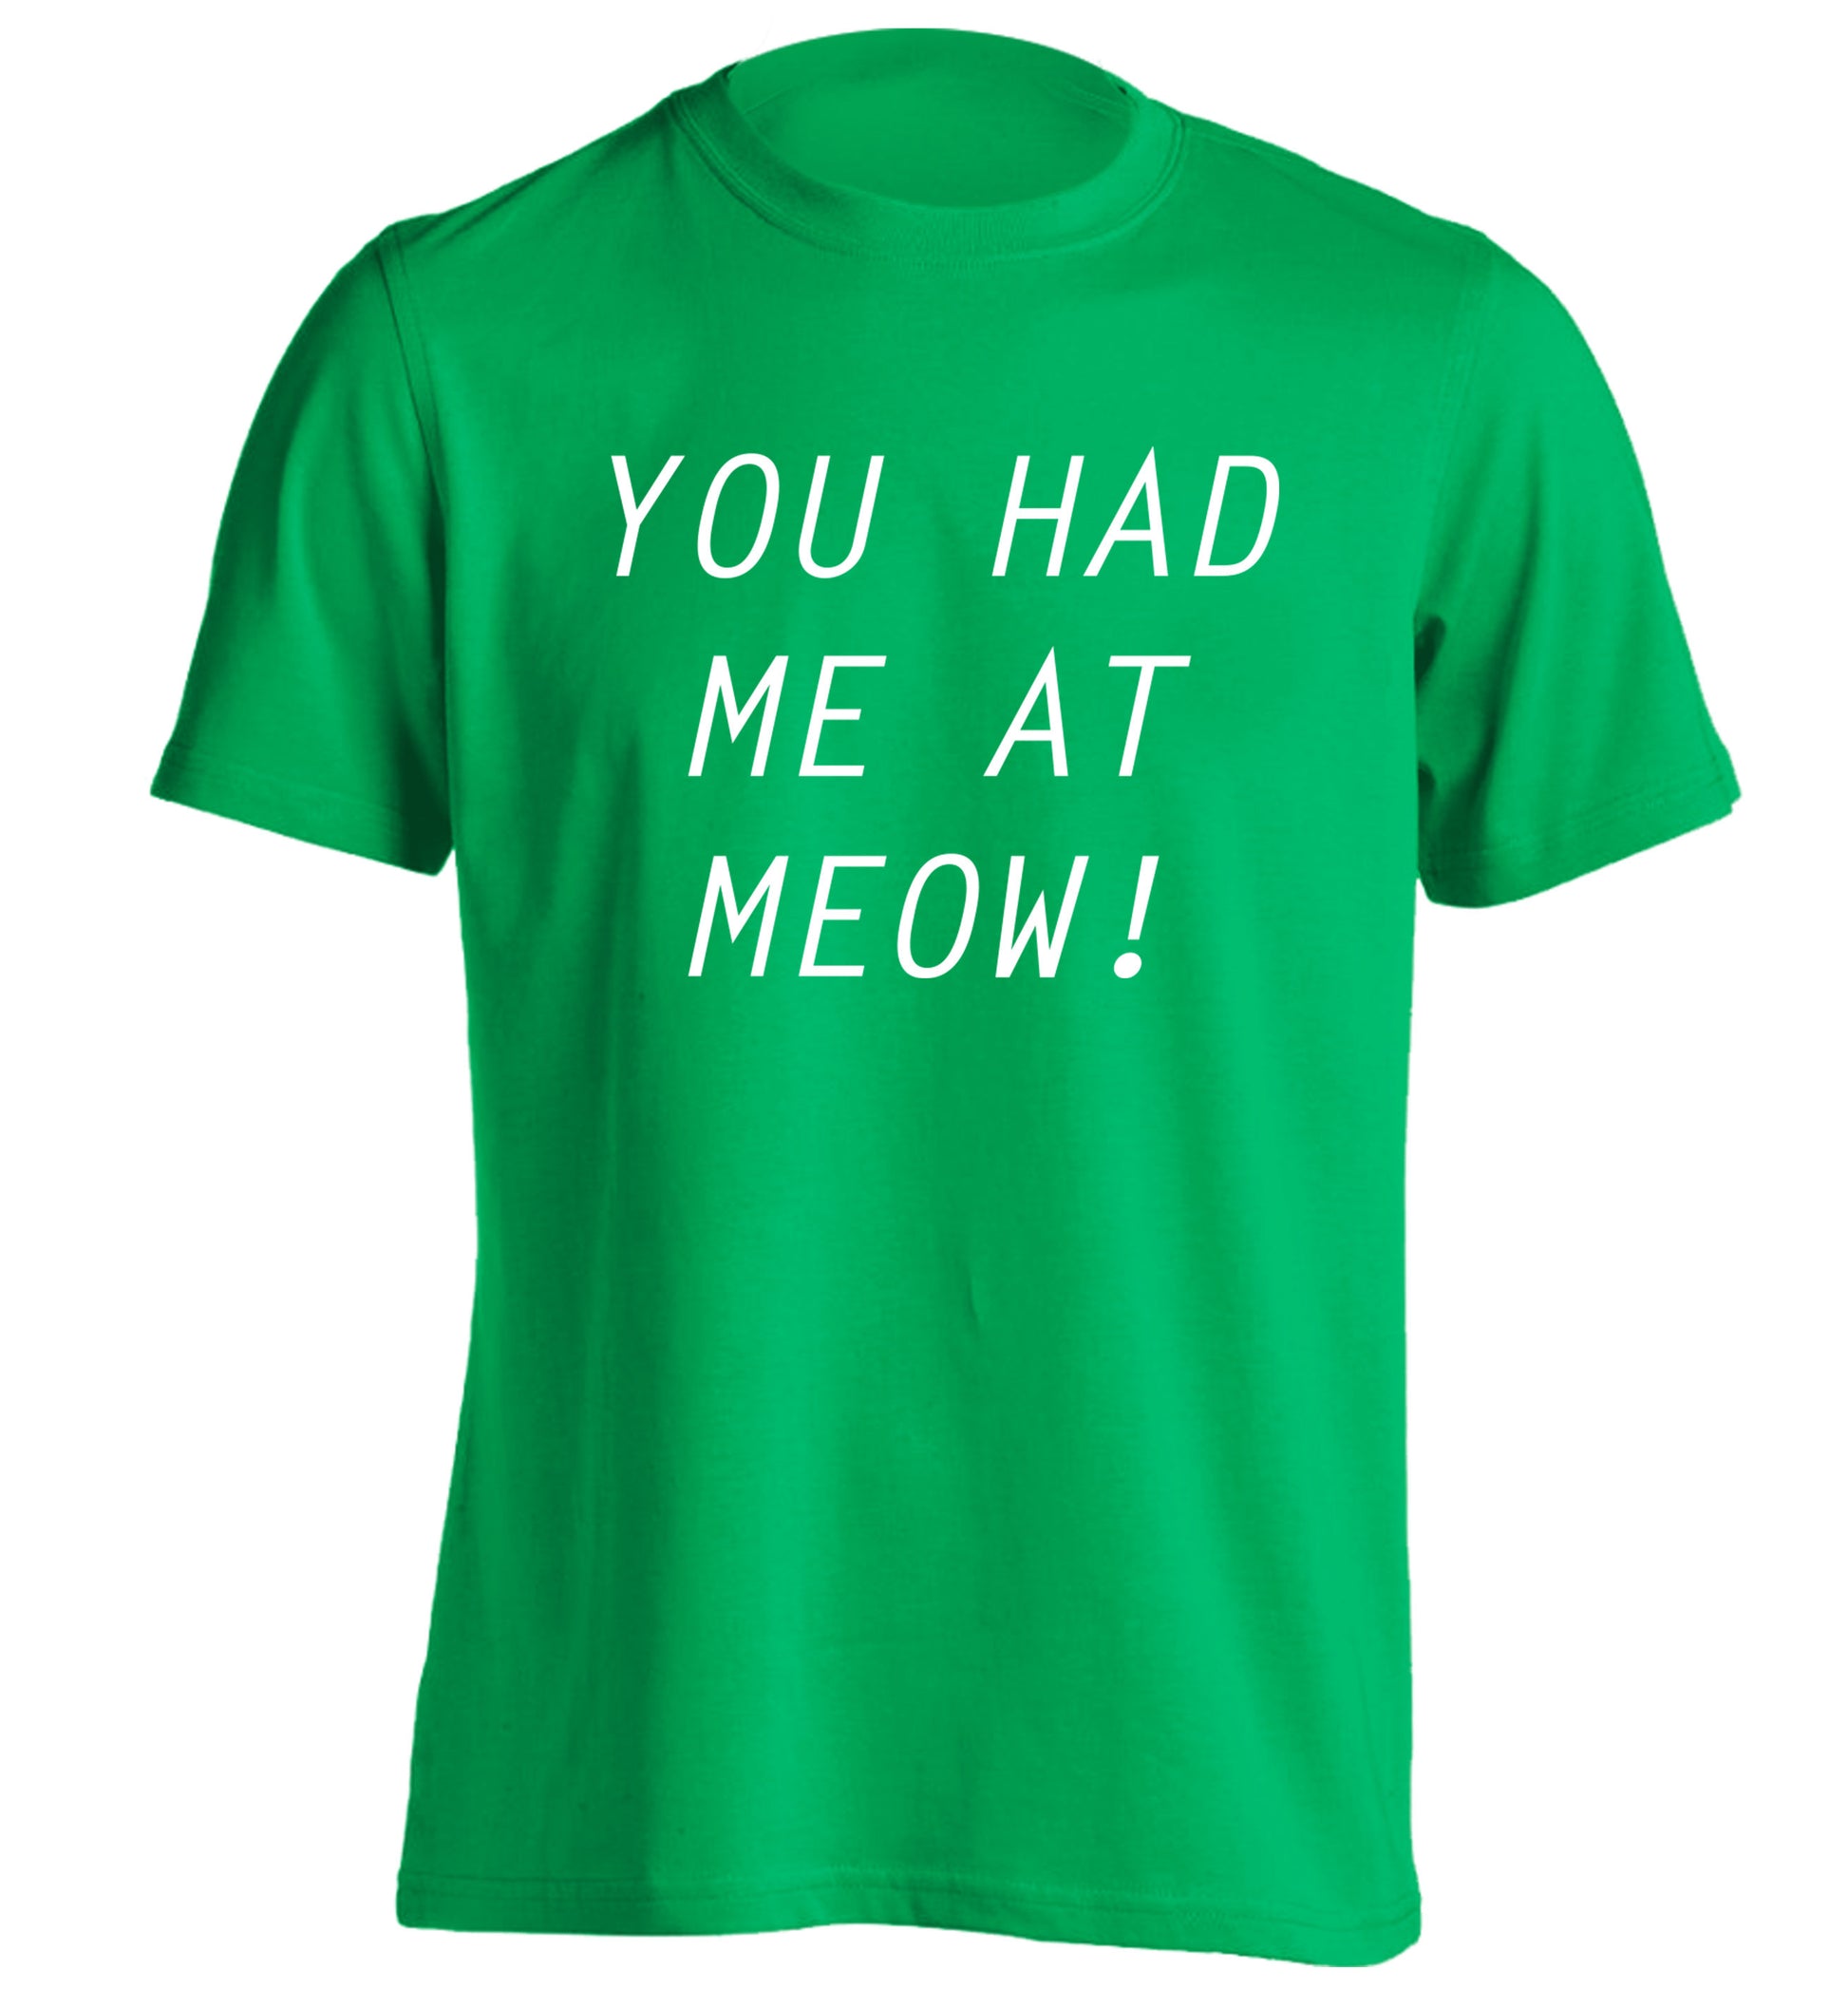 You had me at meow adults unisex green Tshirt 2XL